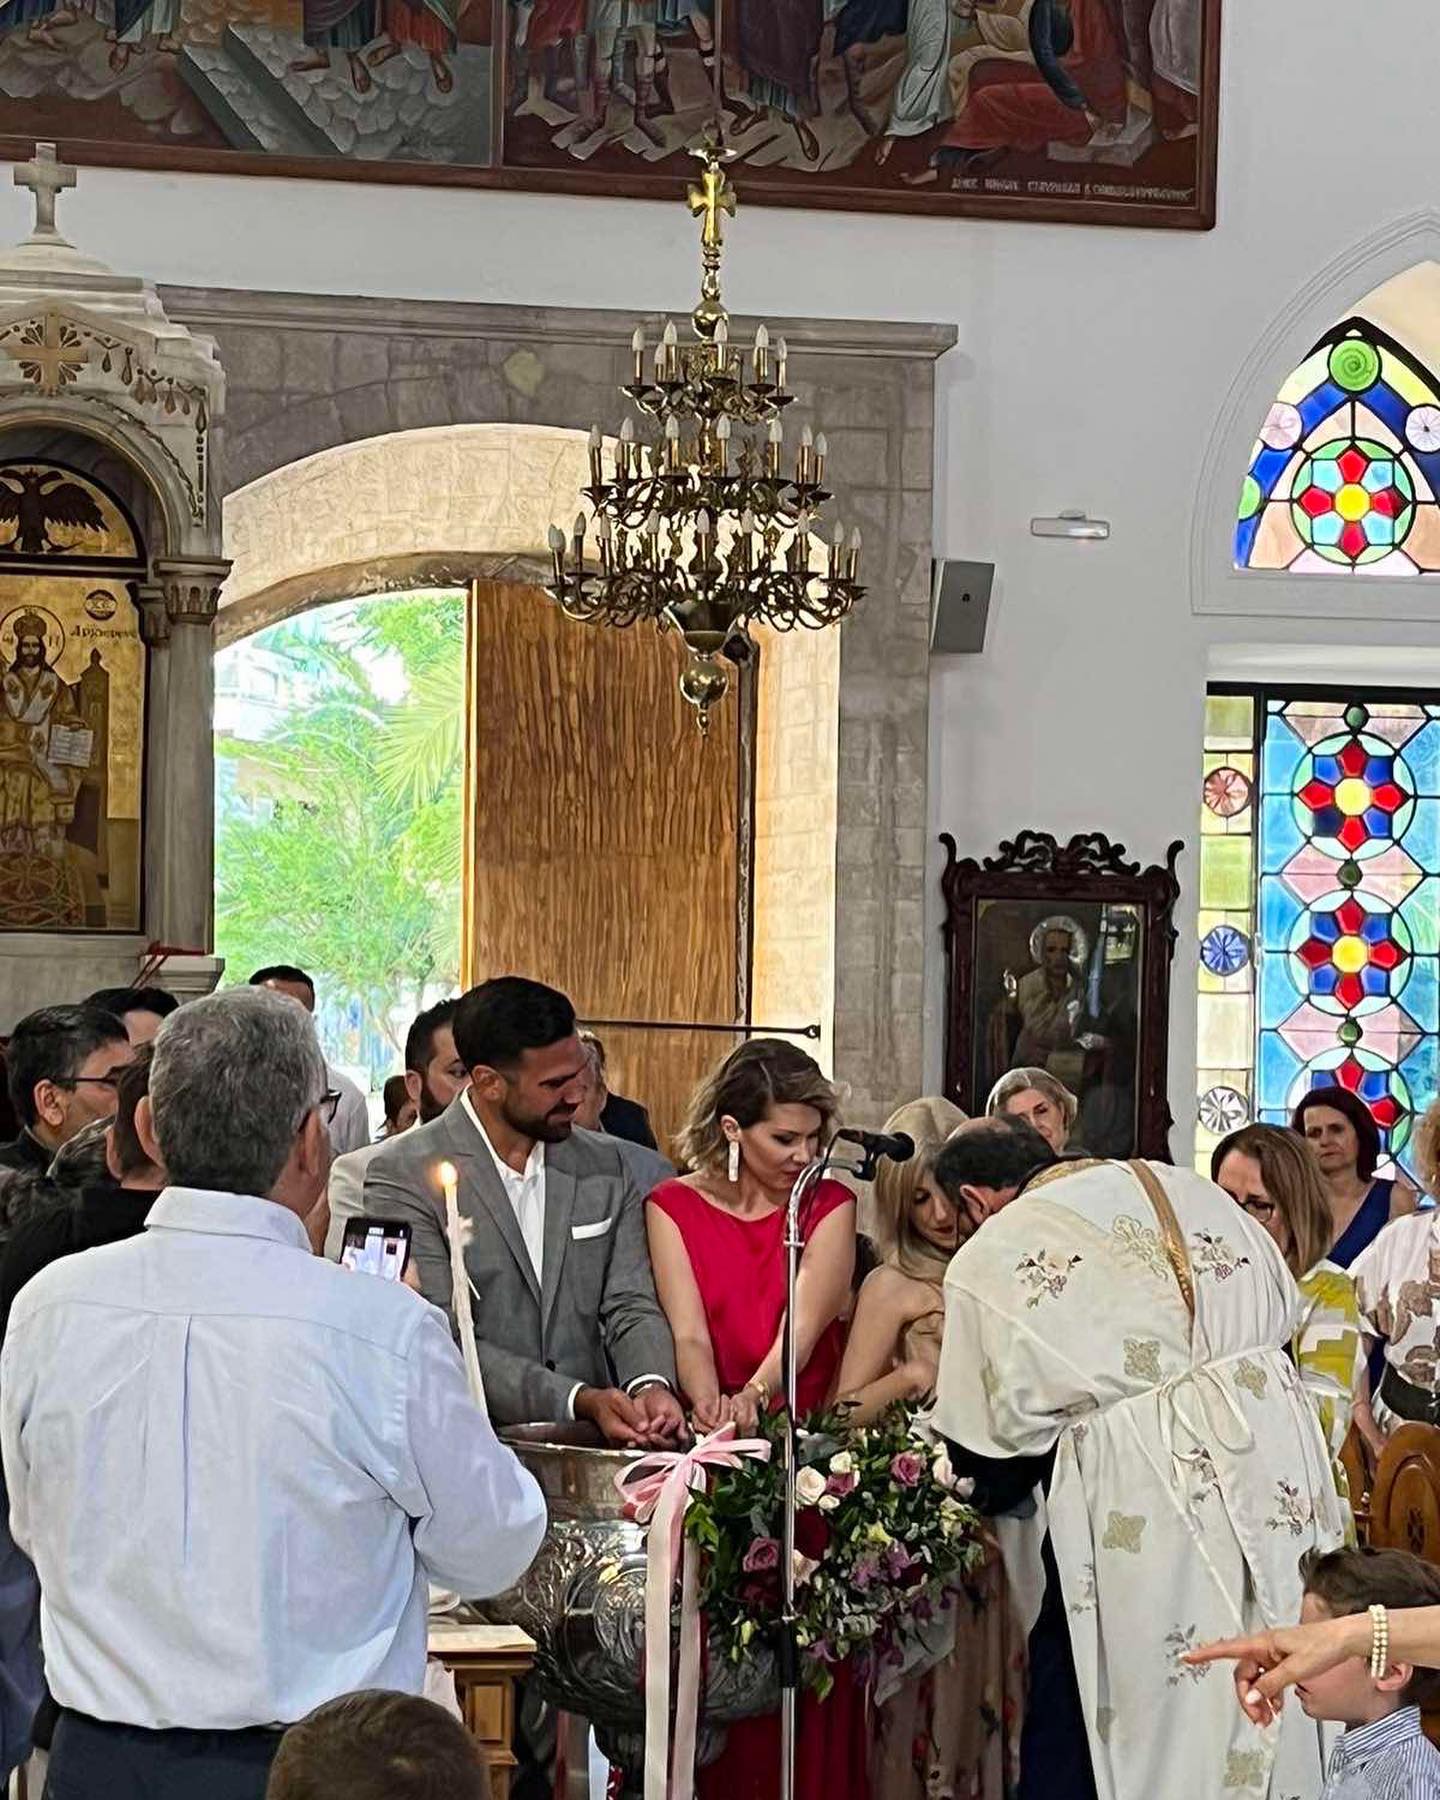 Photo shared by Menia Mathioudaki on June 11 2023 tagging @dimitris vourliotis. May be an image of 10 people and wedding